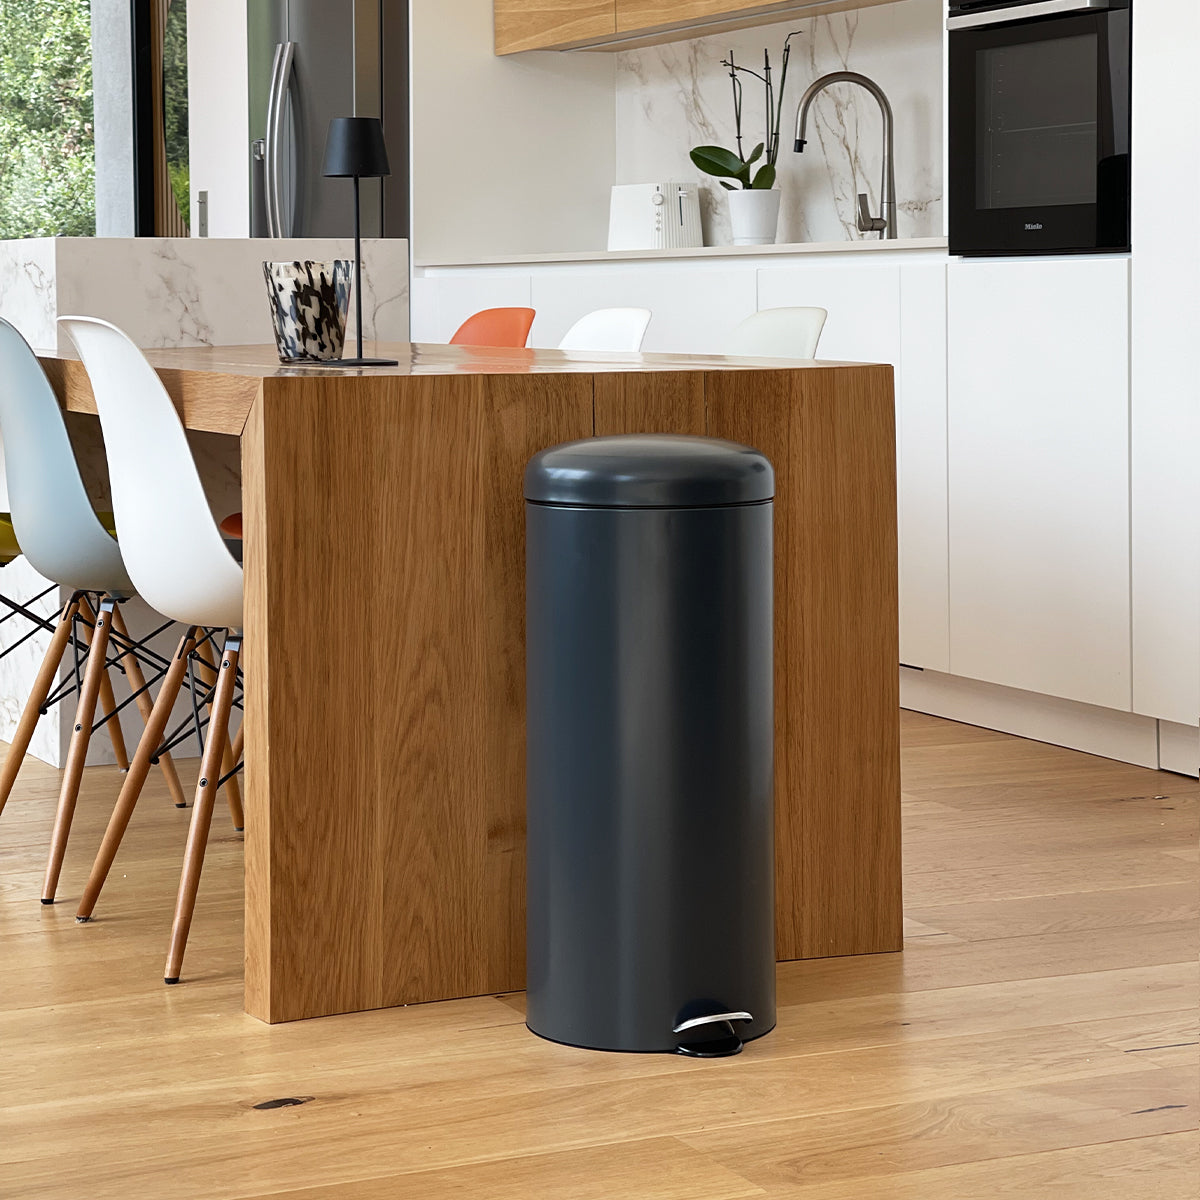 Basic chic cylindrical kitchen pedal bin 30L URBAN Matte gray in stainless steel with bucket